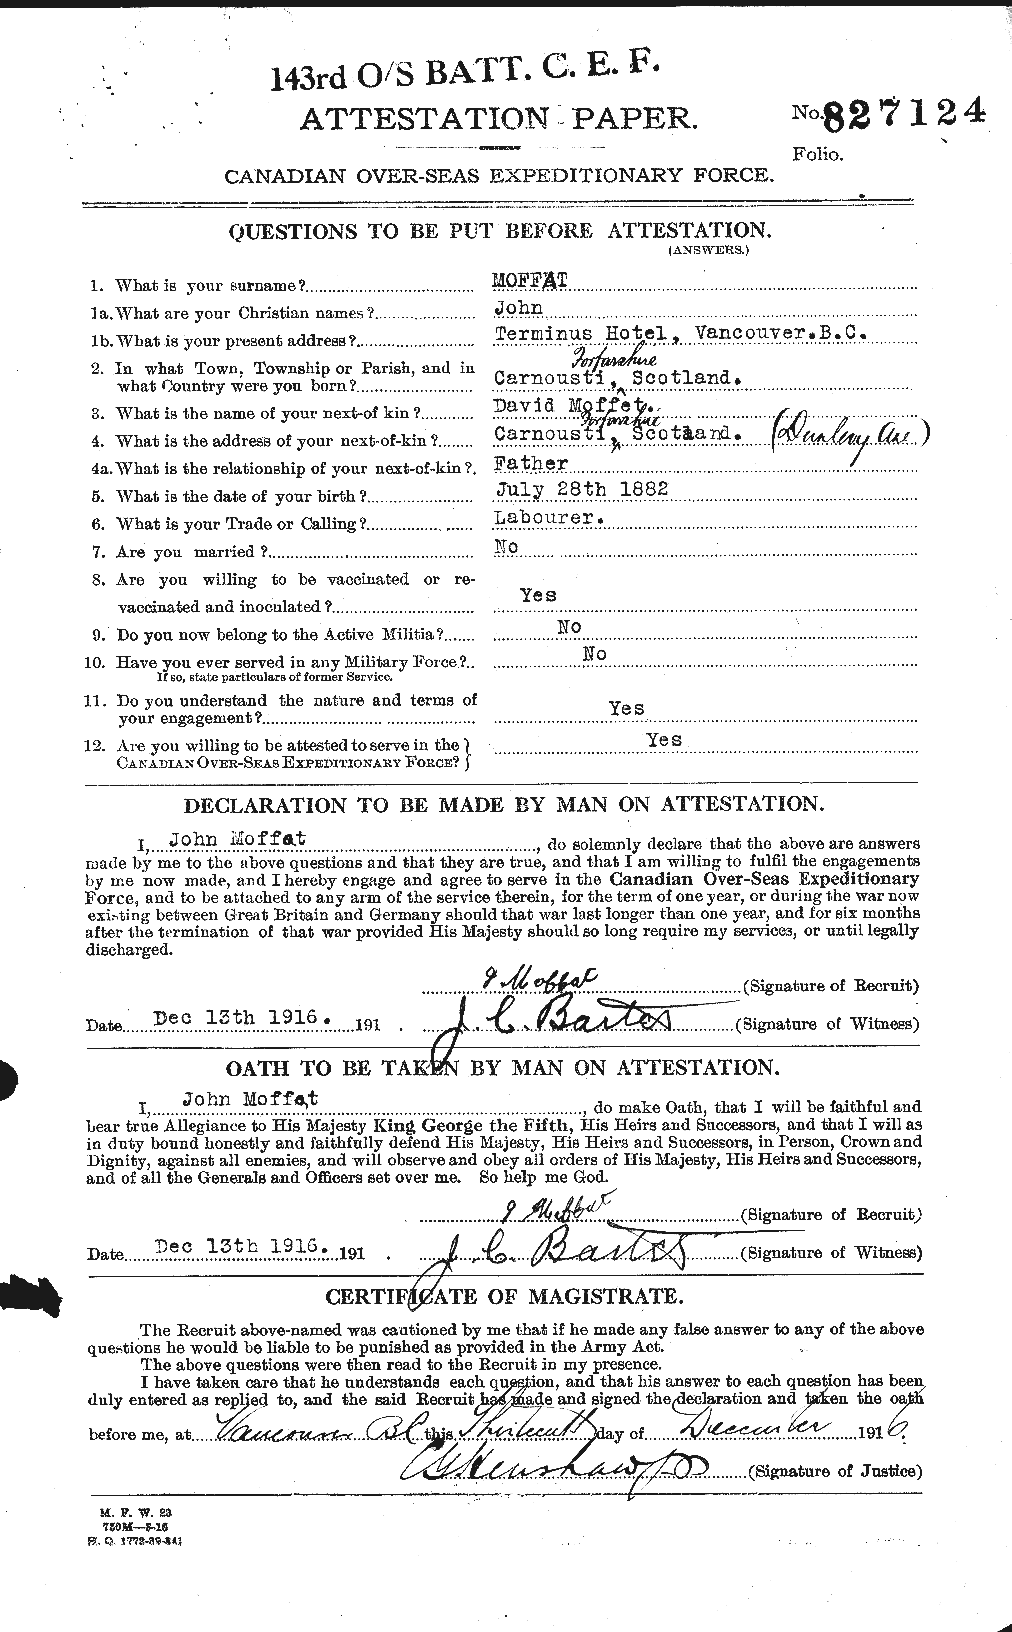 Personnel Records of the First World War - CEF 499045a